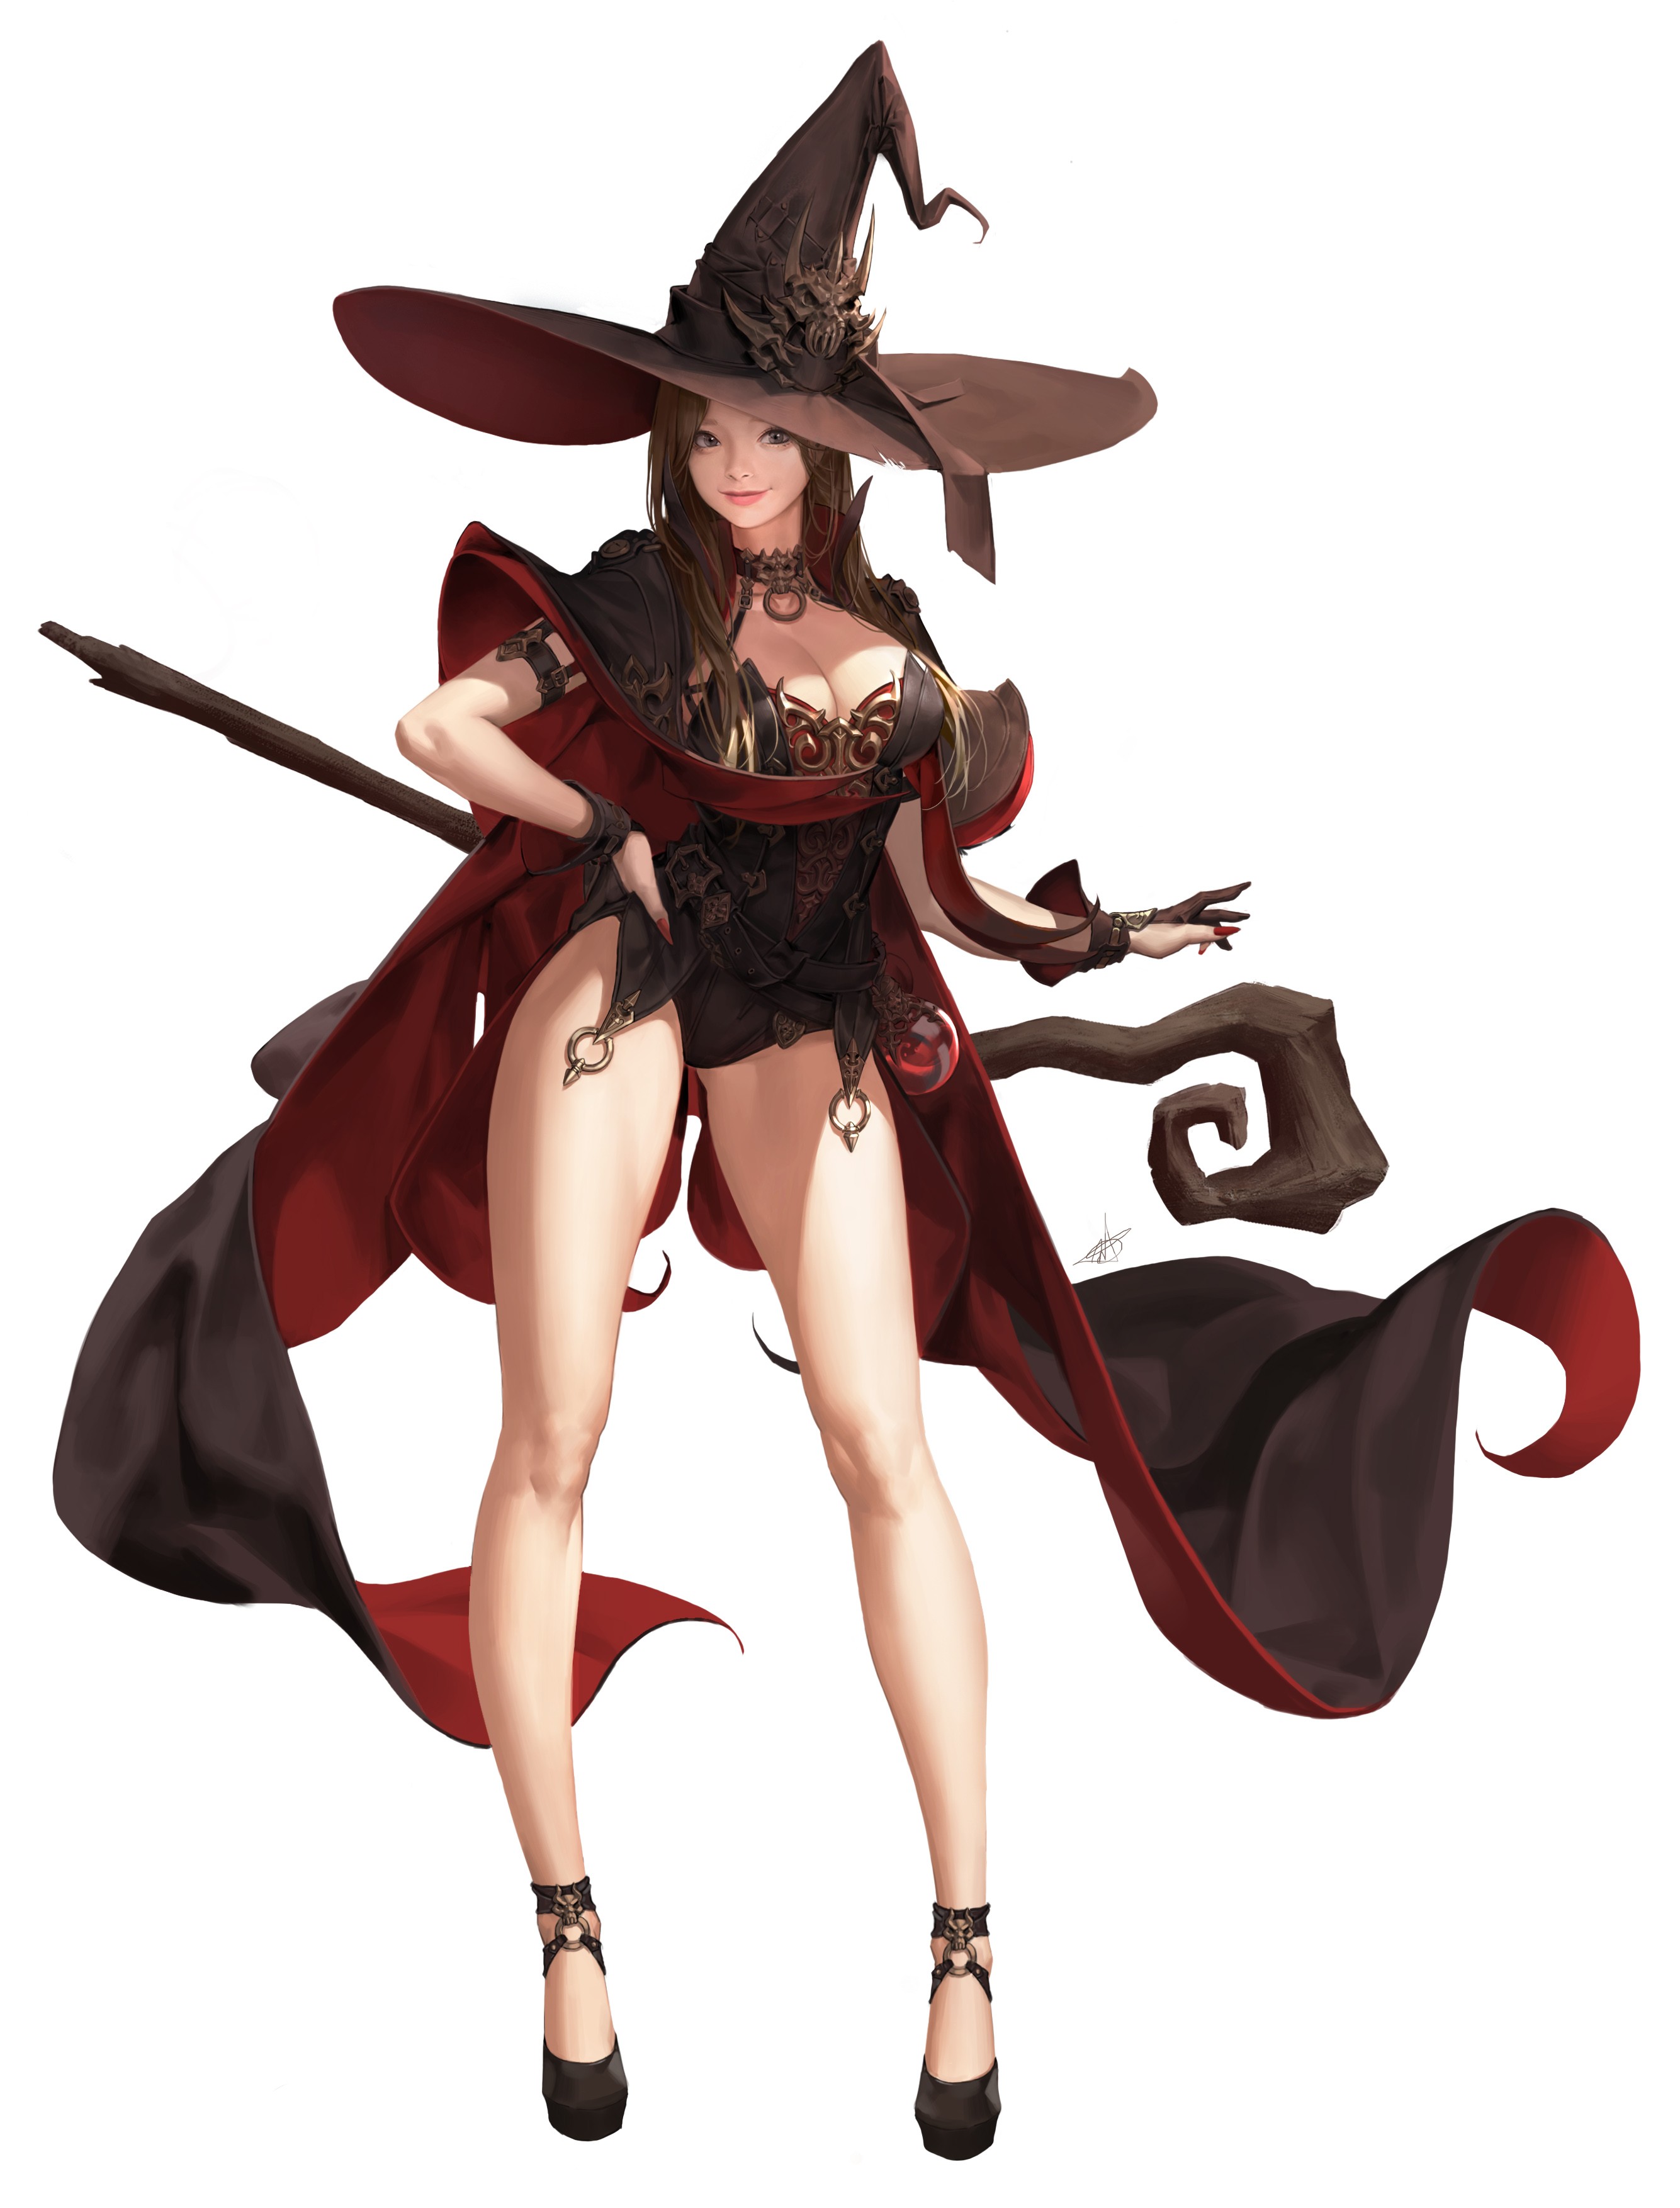 Anime 2669x3508 anime anime girls cleavage heels weapon witch open shirt witch hat long hair brunette Daeho Cha